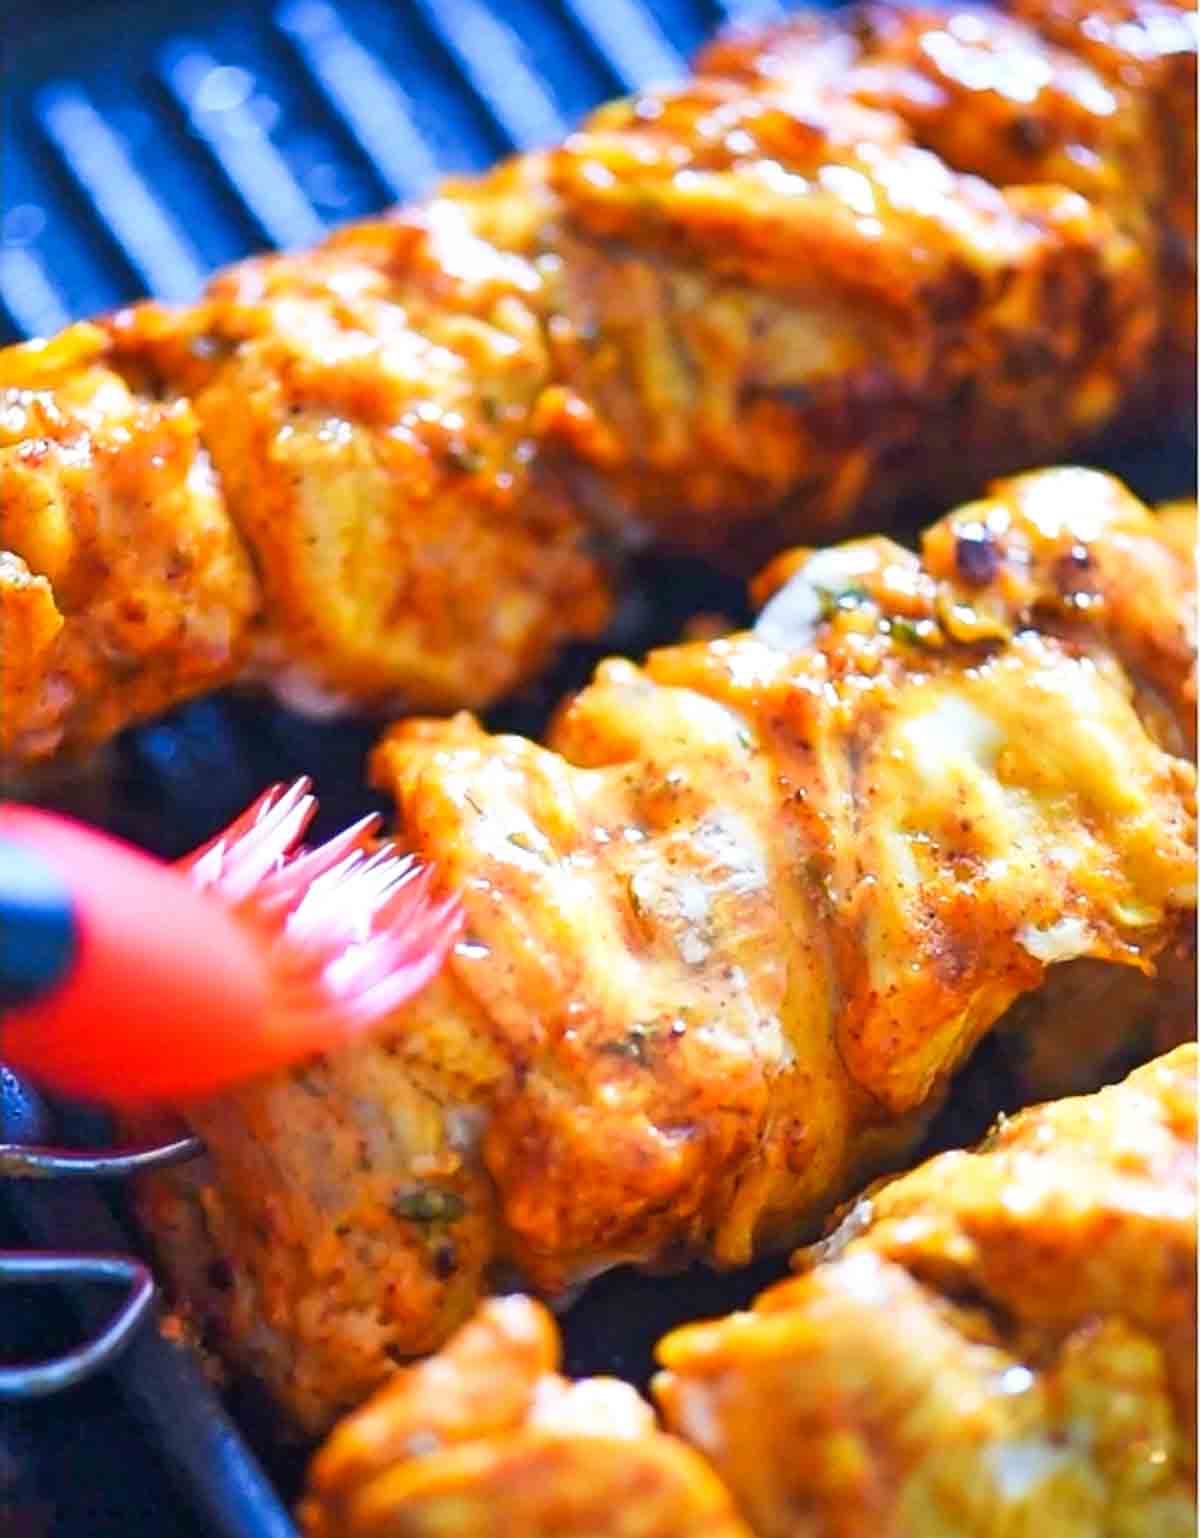 brushing oil on chicken skewers being grilled